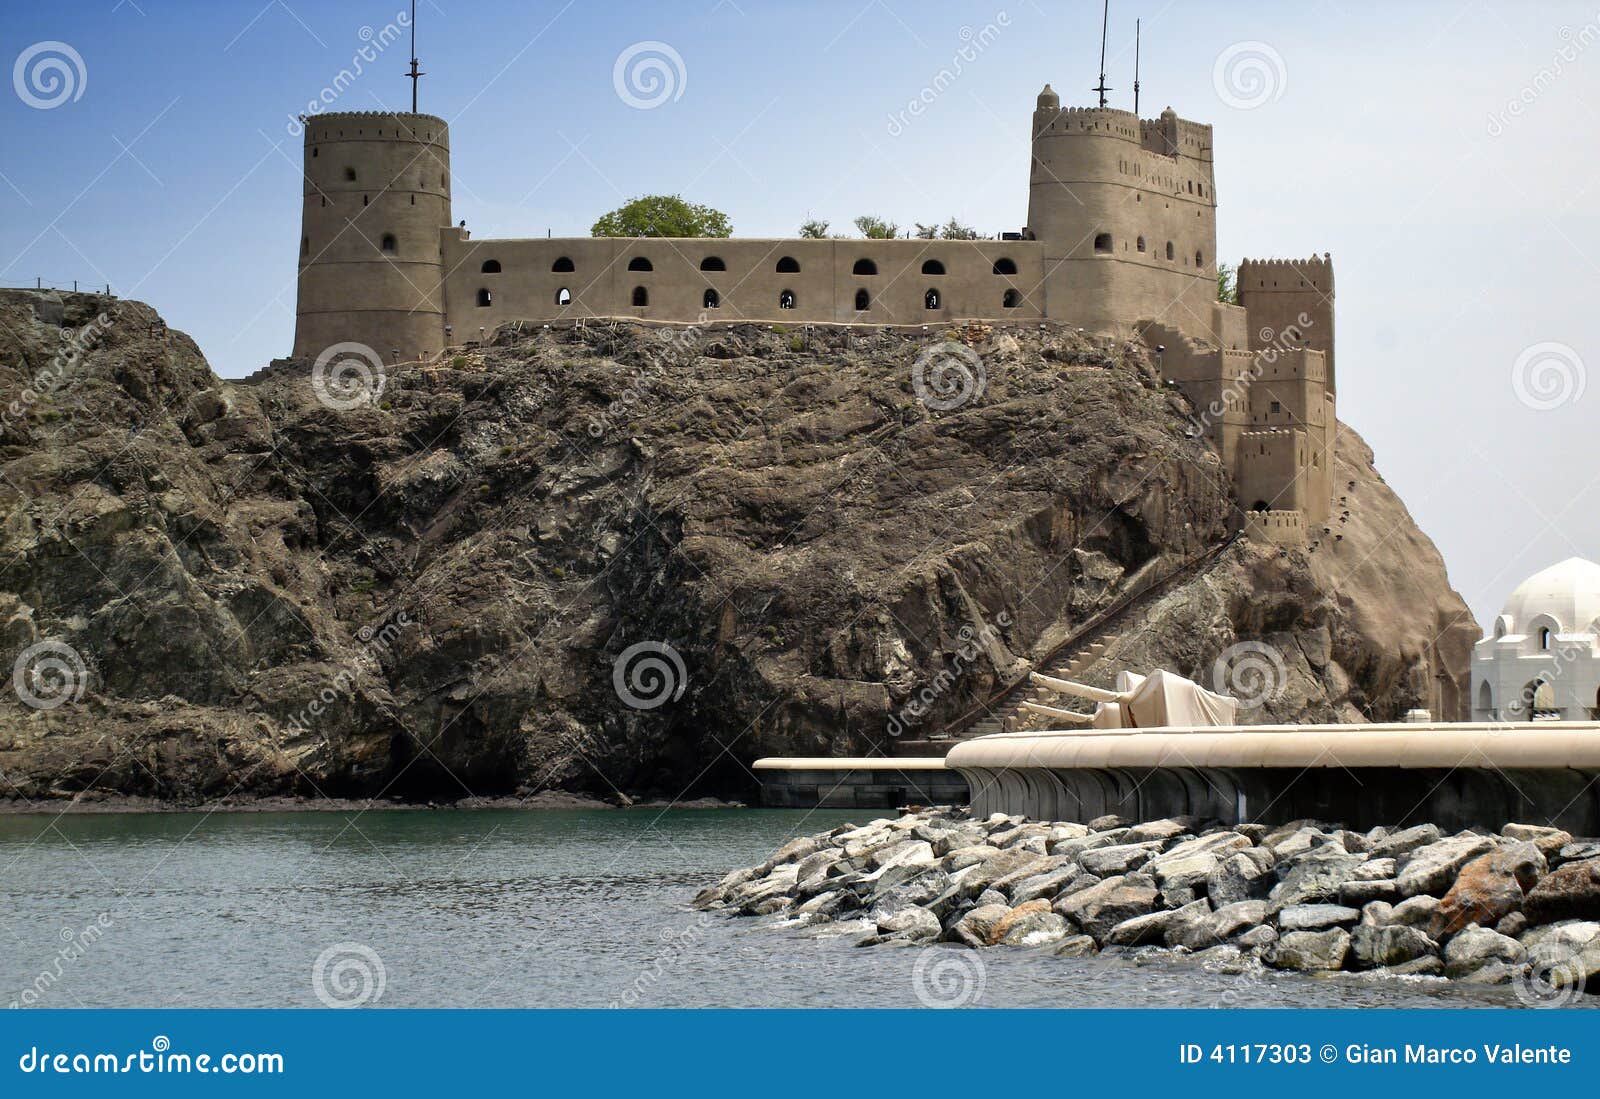 muscat fortress